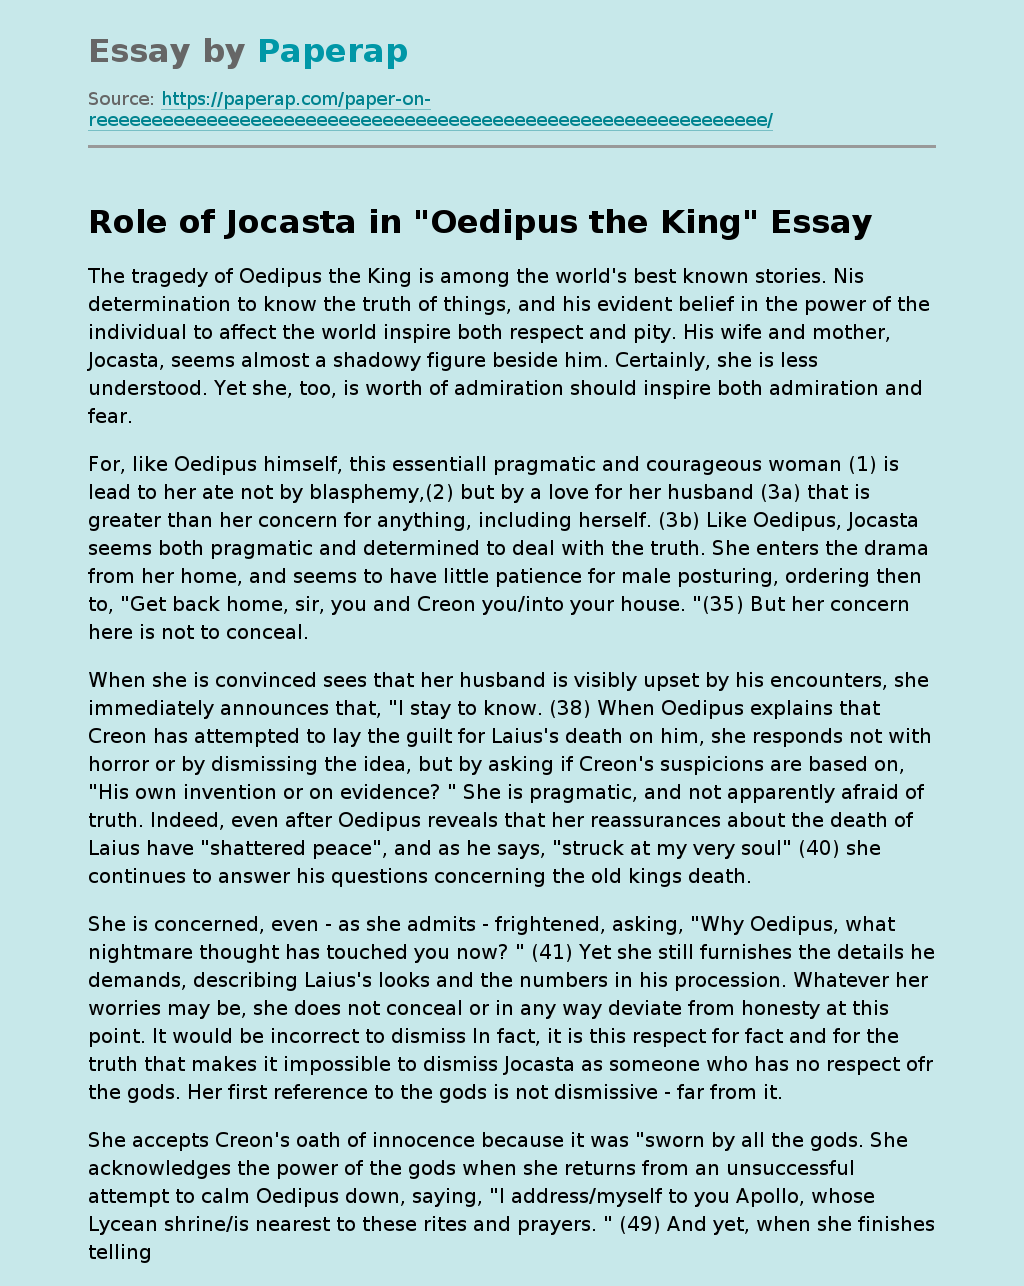 Role of Jocasta in "Oedipus the King"